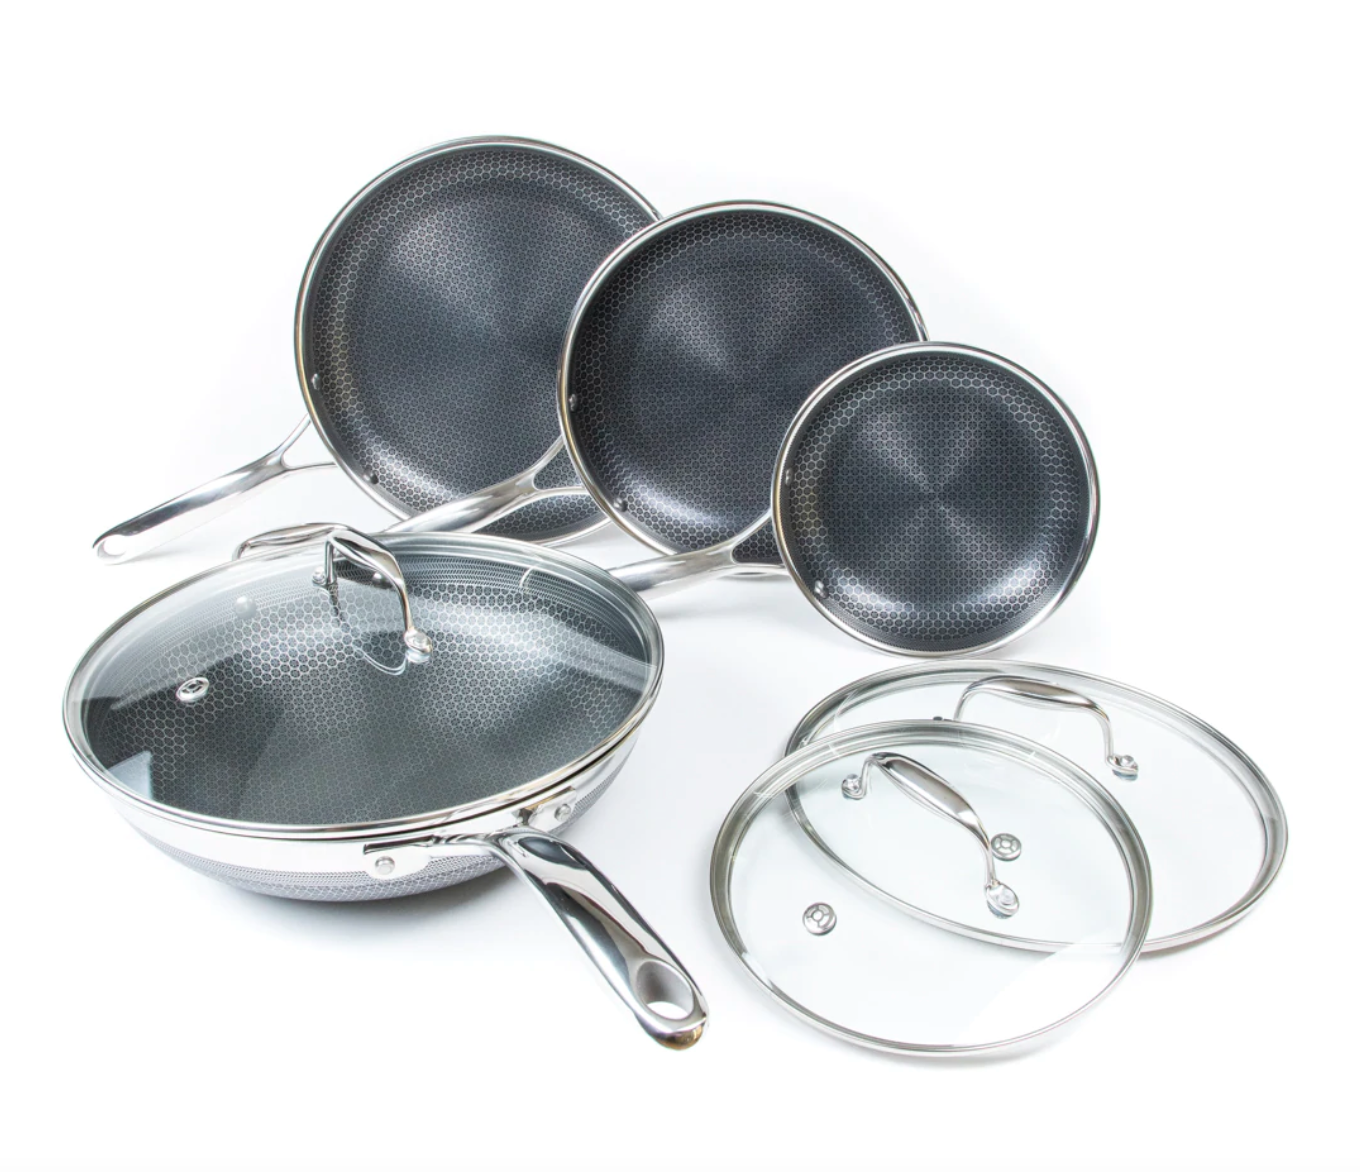 7pc HexClad Hybrid Cookware Set and Wok